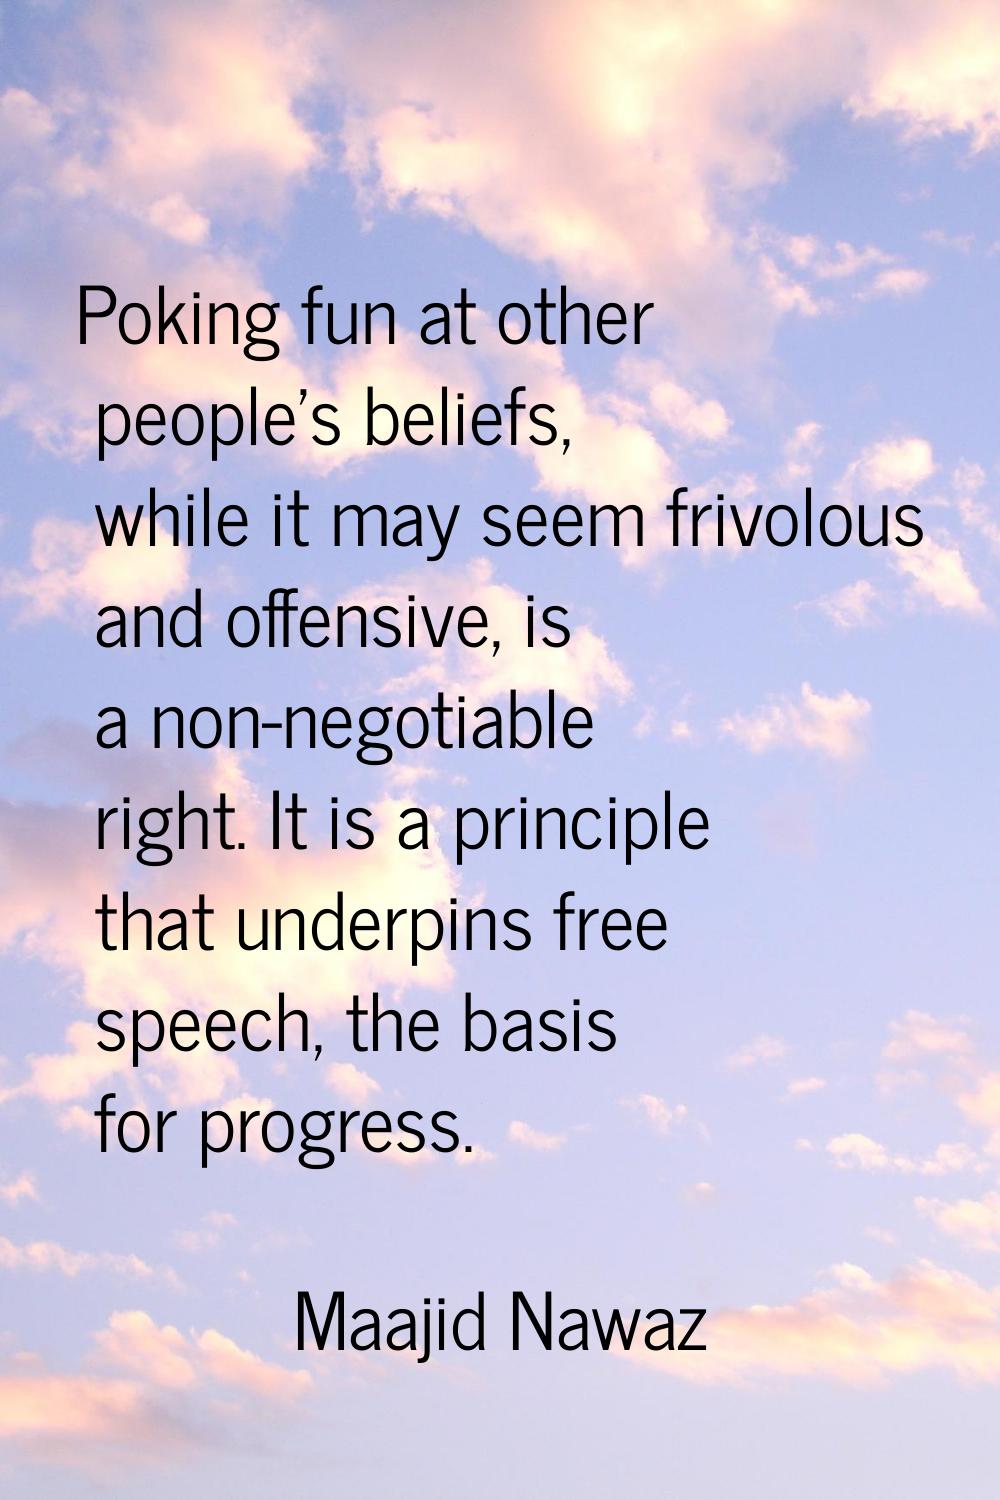 Poking fun at other people's beliefs, while it may seem frivolous and offensive, is a non-negotiabl